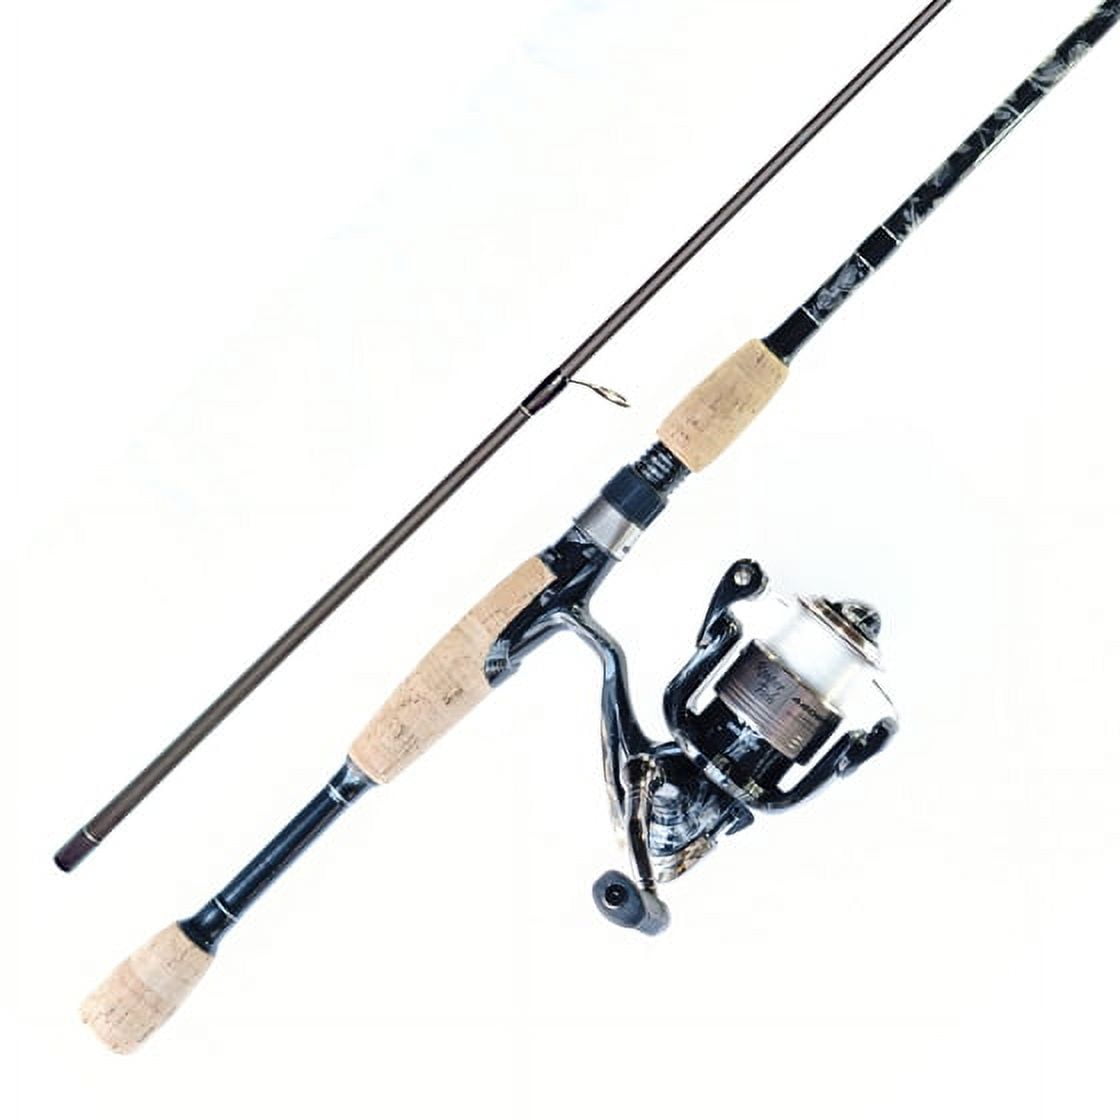  One Bass Fishing Rod And Reel Combo, IM7 Graphite 2 Pc Blank  Baitcasting Combo, Spinning Rod